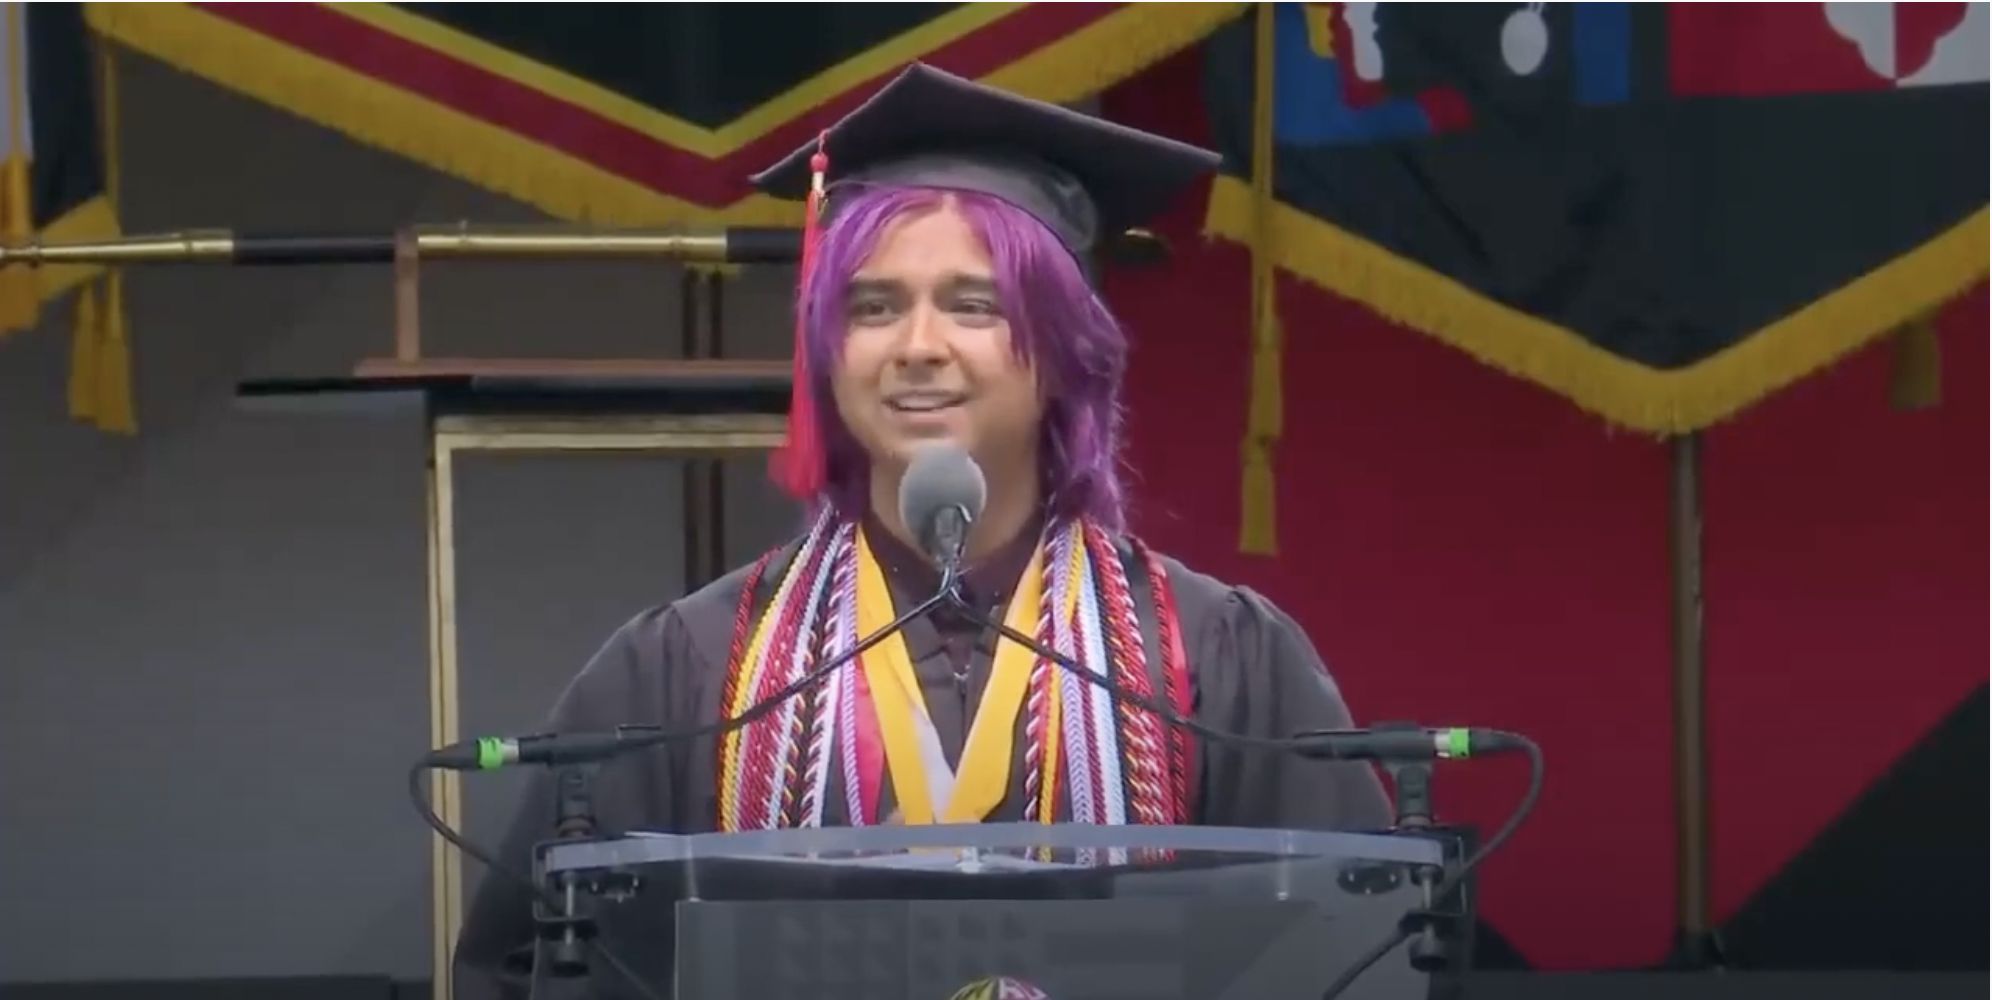 Spring 2022 Commencement Address by UH student M Pease